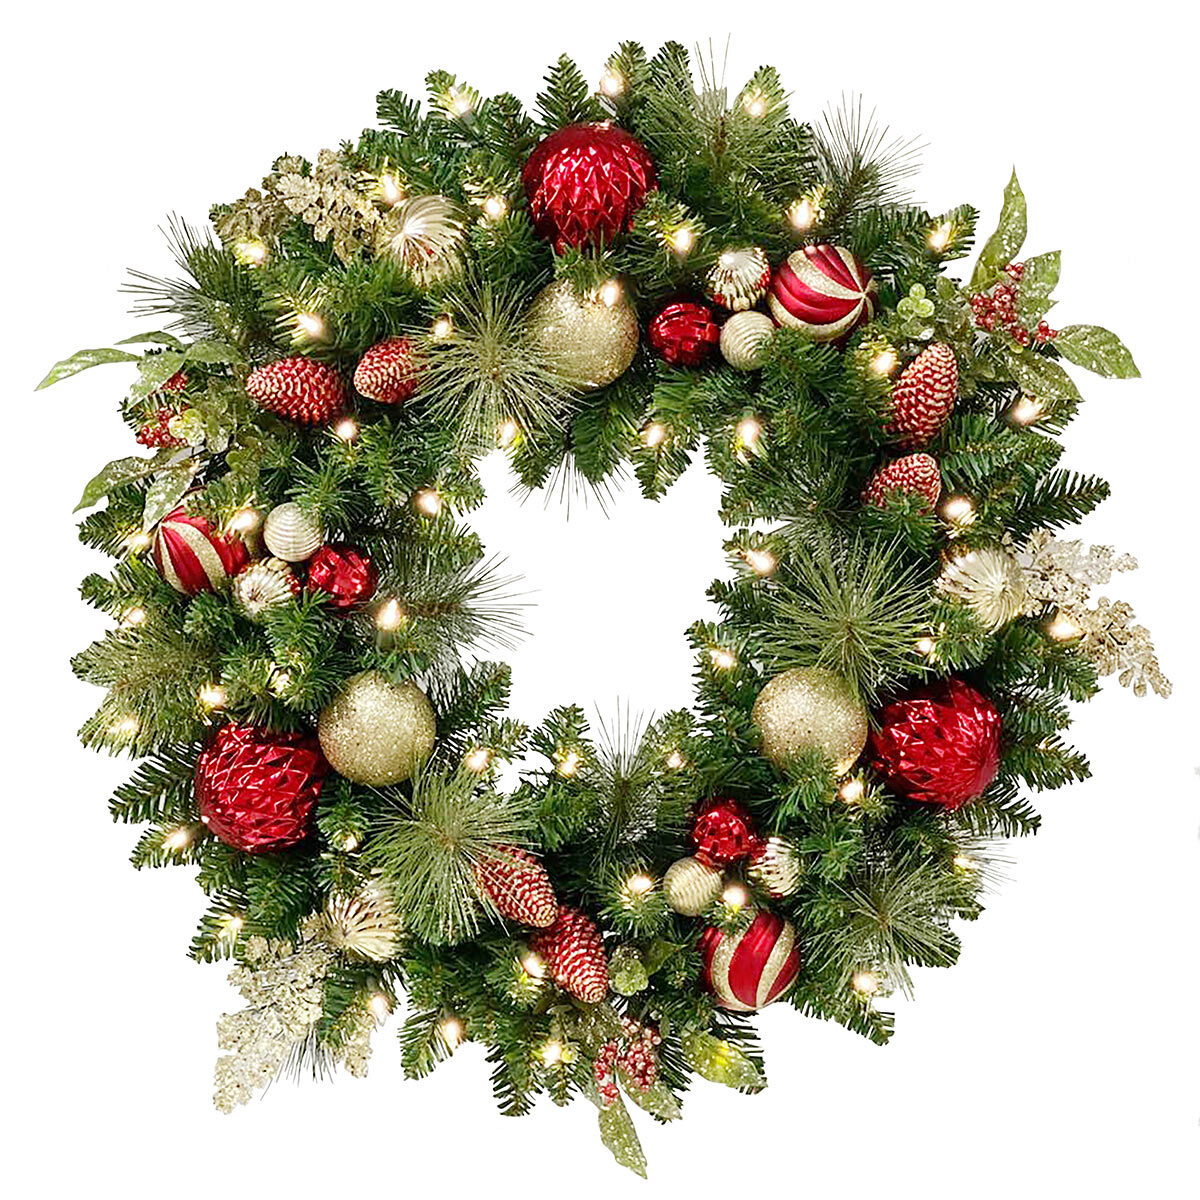 Buy 30" Wreath with Lights Overview Image at Costco.co.uk